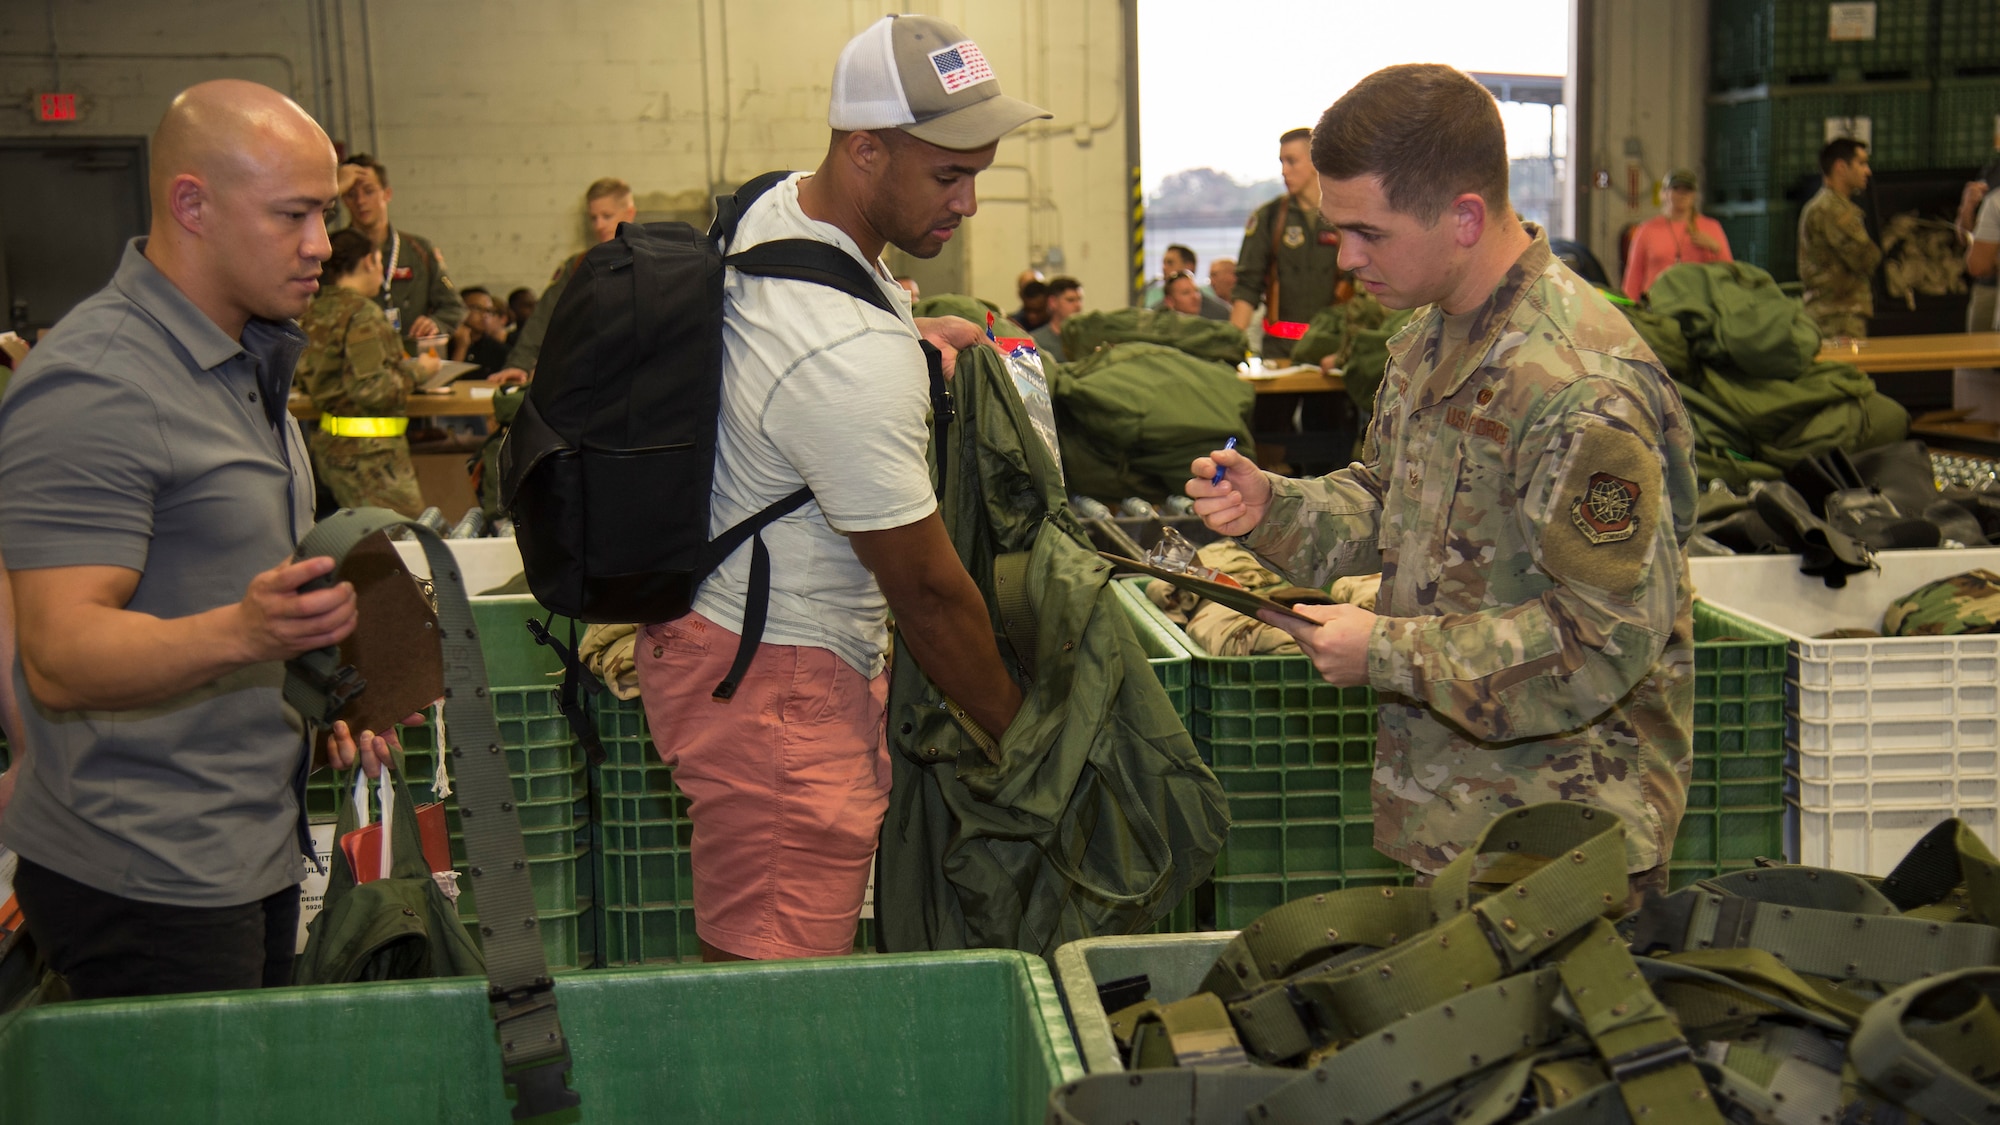 U.S. Senior Airman Justin Auger, a 6th Logistics Readiness Squadron customer service technician, checks an inventory list during an operational readiness exercise Oct. 22, 2019, at MacDill Air Force Base, Fla. The 6th LRS was tasked to exercise their capabilities of readying personnel and cargo during a simulated deployment scenario.